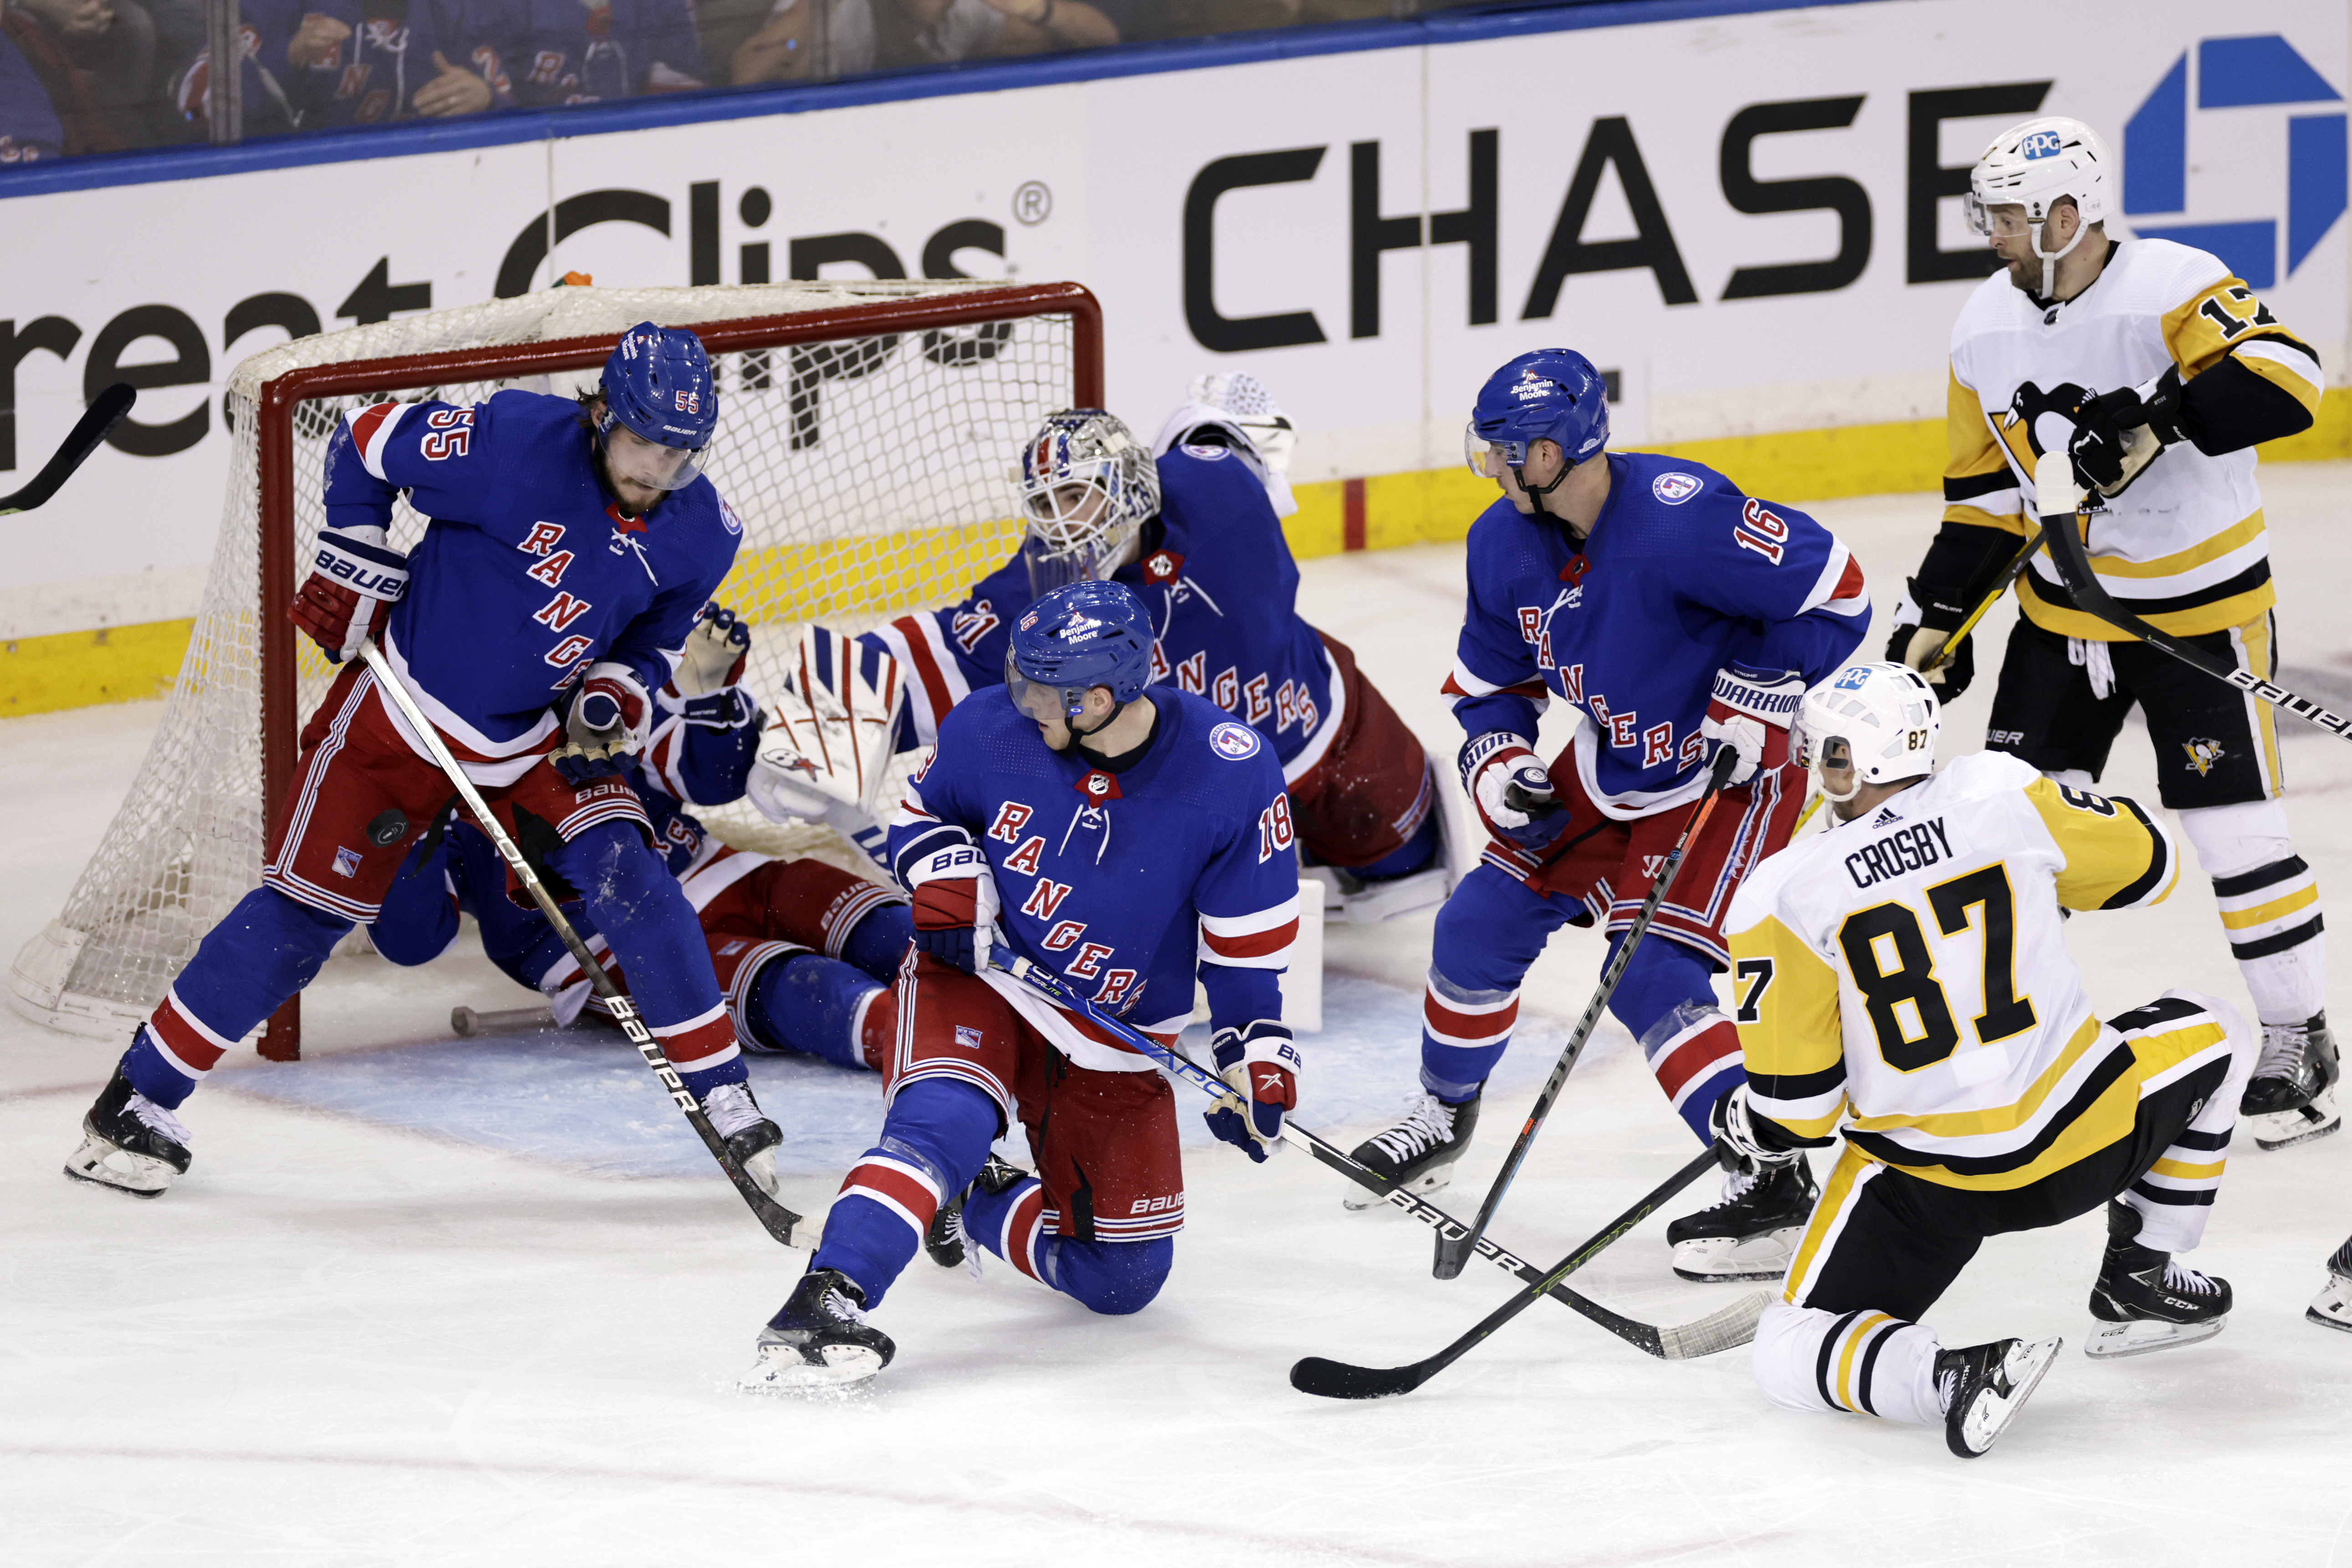 The Sidney Crosby Show: Pens v Rangers (W 8-3)